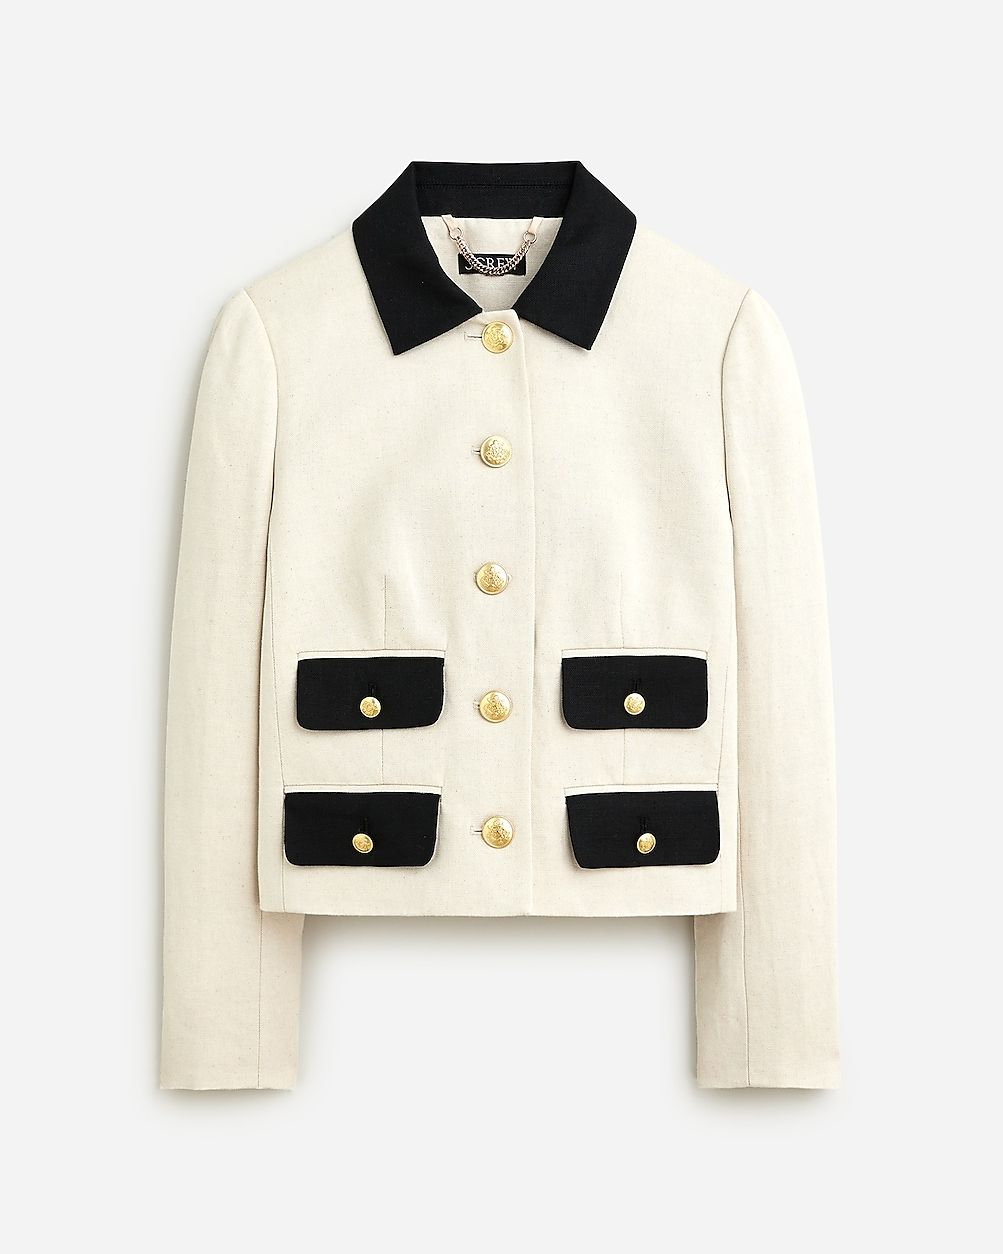 Contrast lady jacket in textured linen blend | J.Crew US